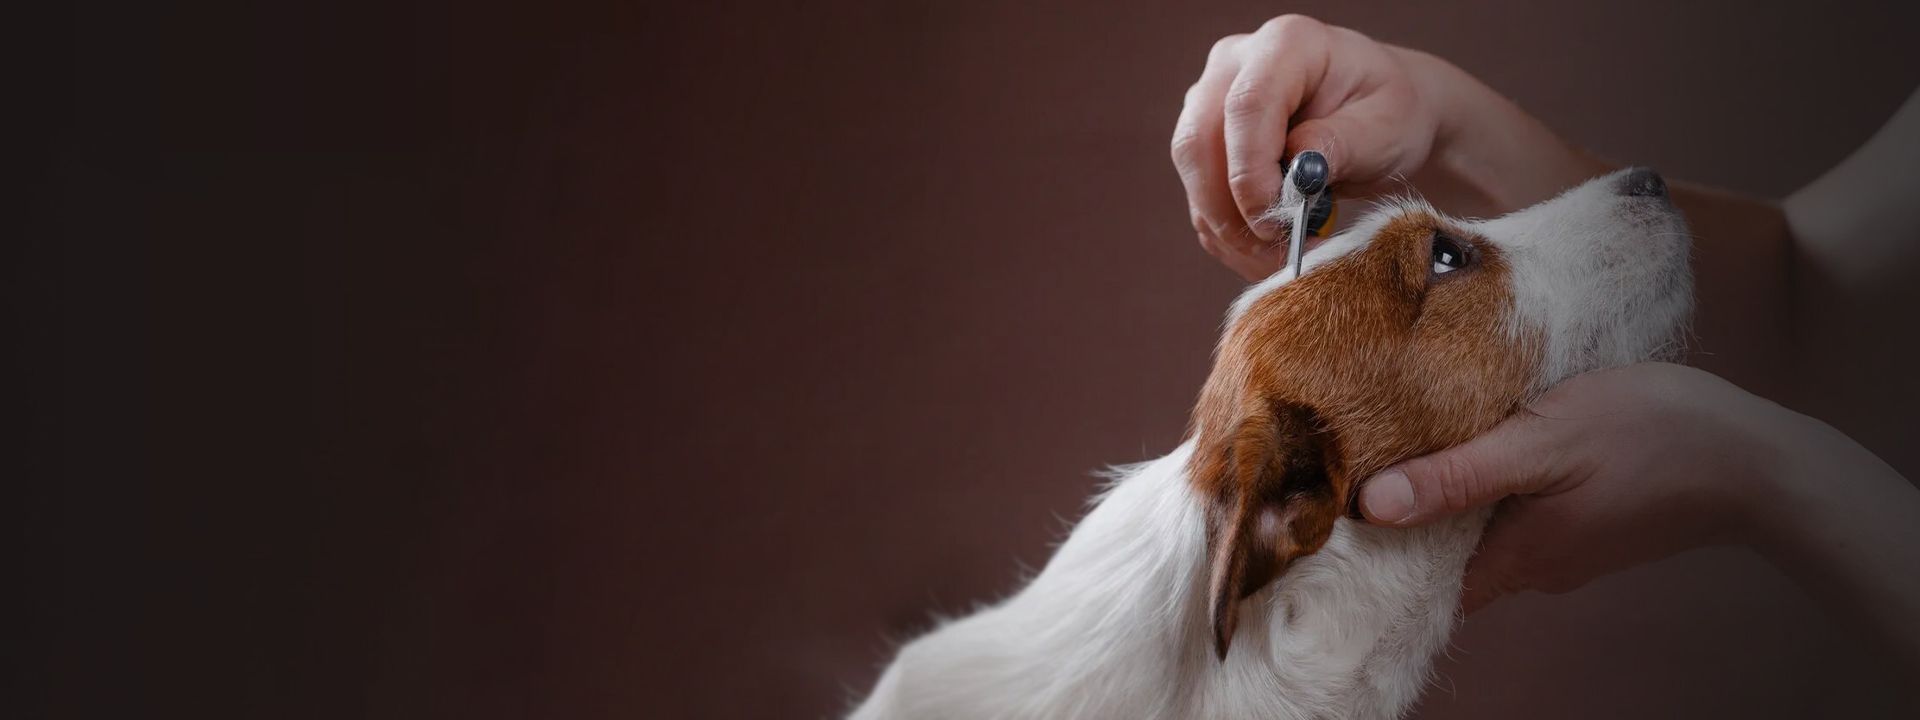 pet groomer brushing the hair of a dog